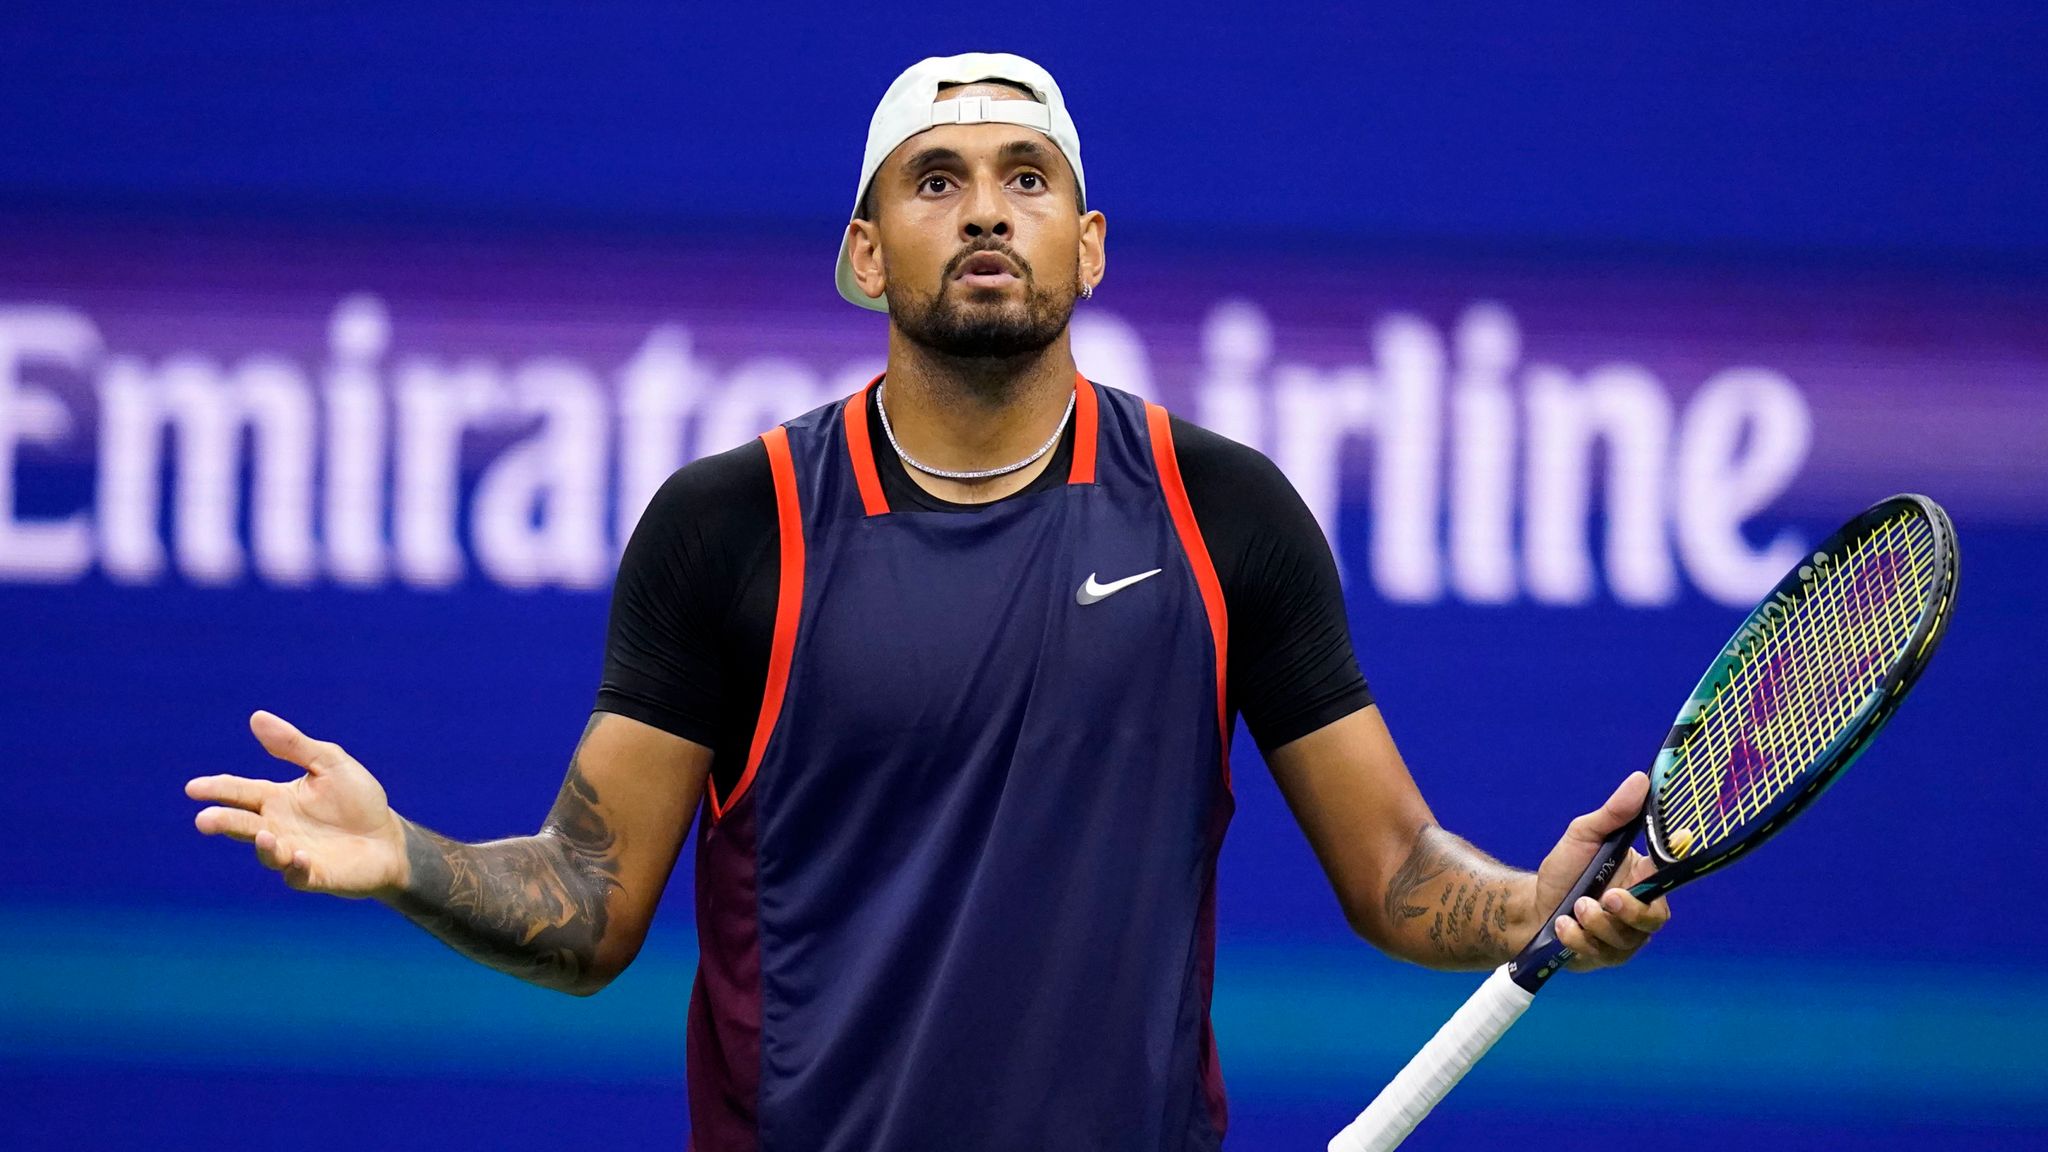 Nick Kyrgios Net Worth - How The Tennis Prodigy Built His Financial Empire